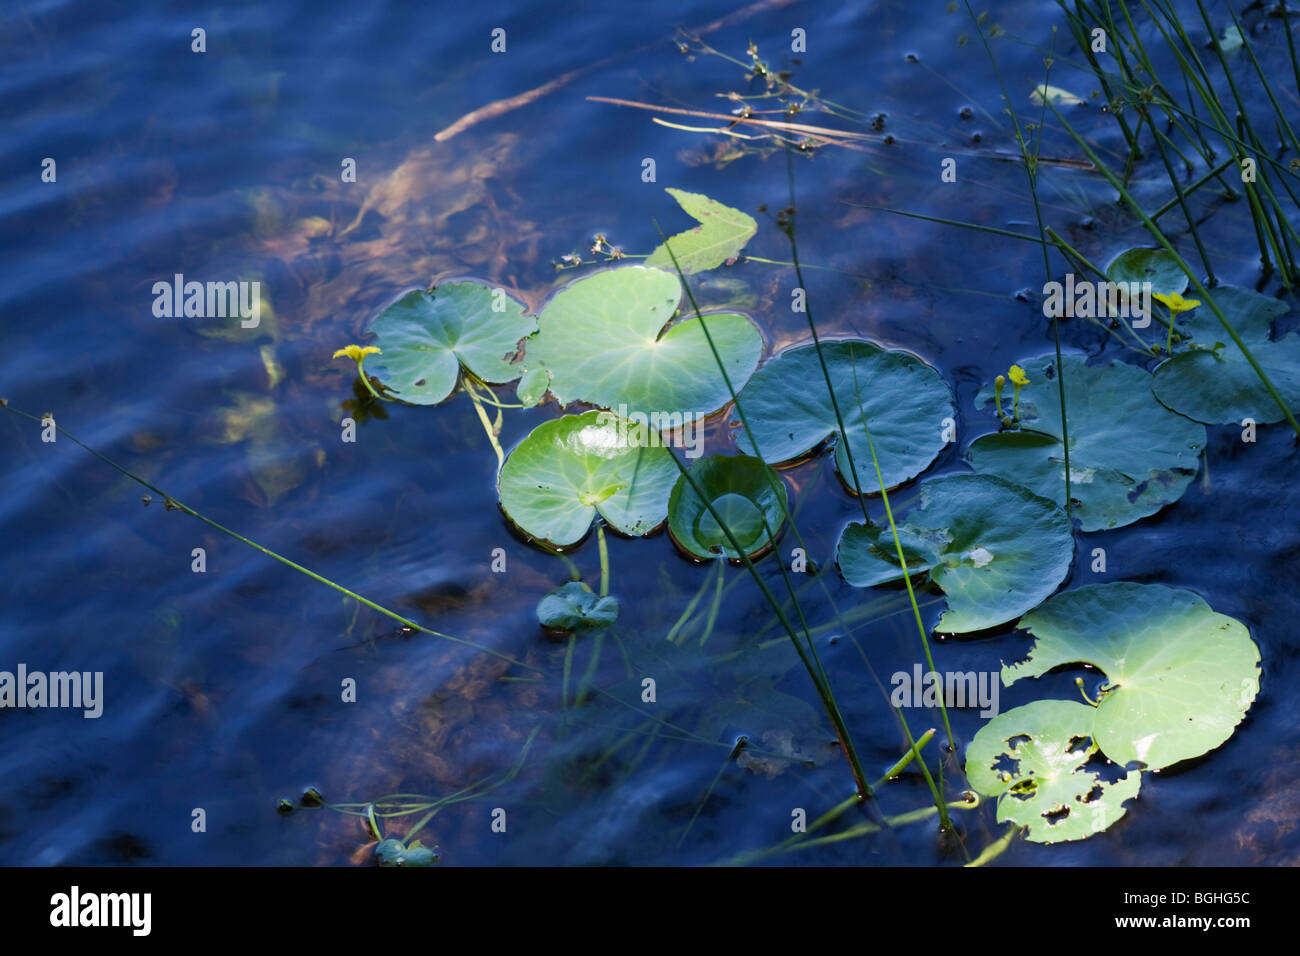 Shaft of sunlight highlighting water lilies on rippled surface. Color. Stock Photo